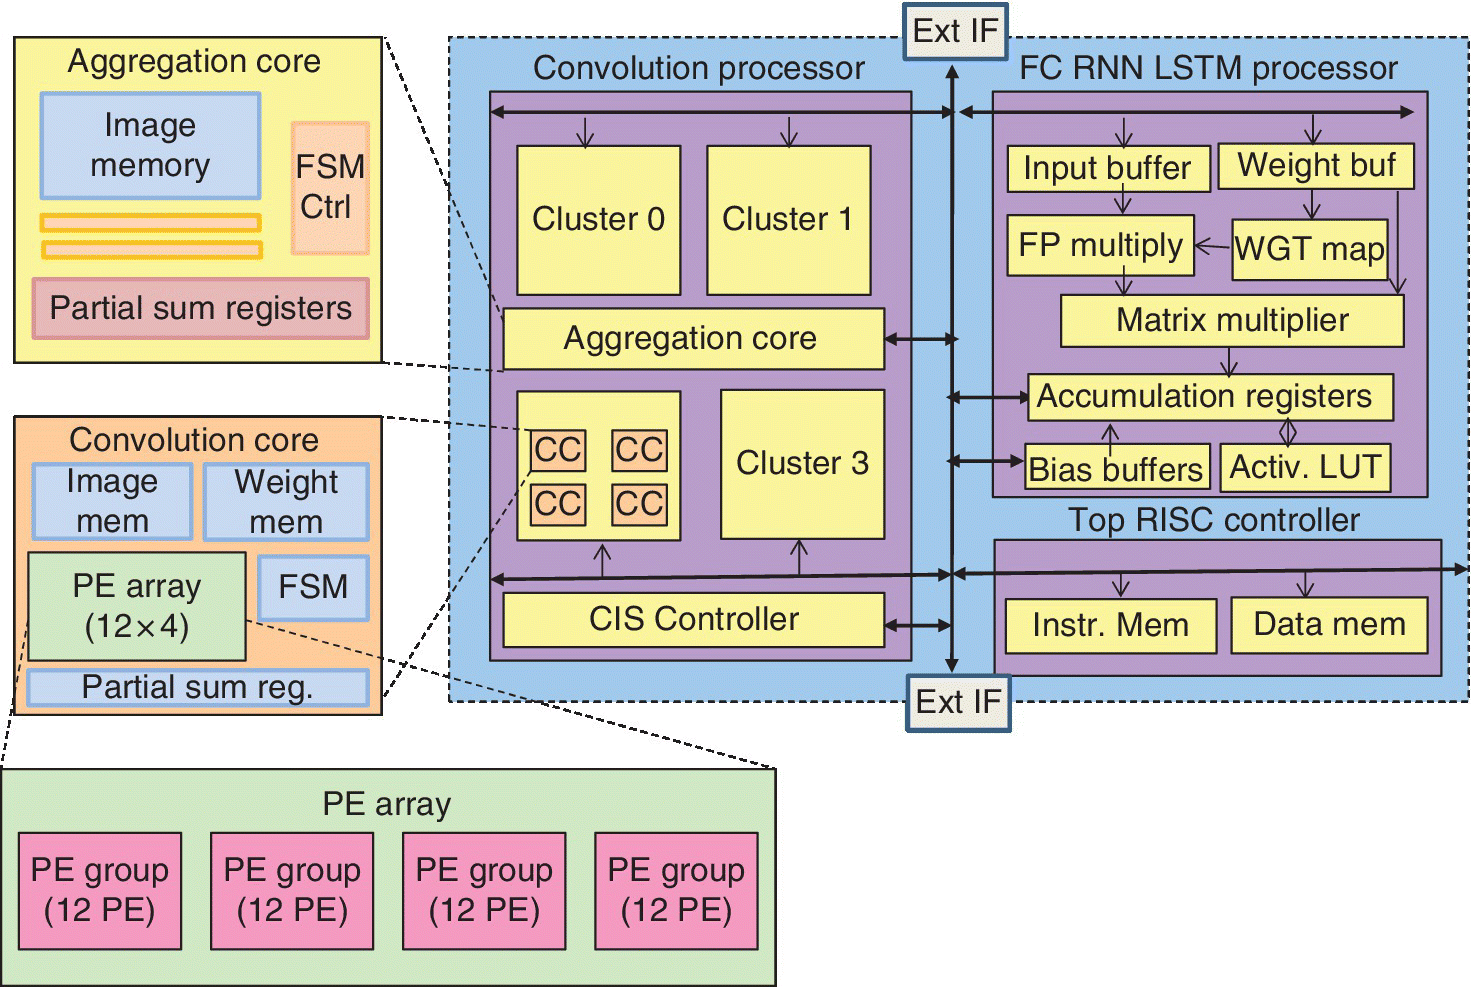 Block diagram of deep neural processing unit (DNPU), displaying a dashed box with convolution processor and FC RNN LSTM processor, with inset boxes for aggregation and convolution cores and PE array.